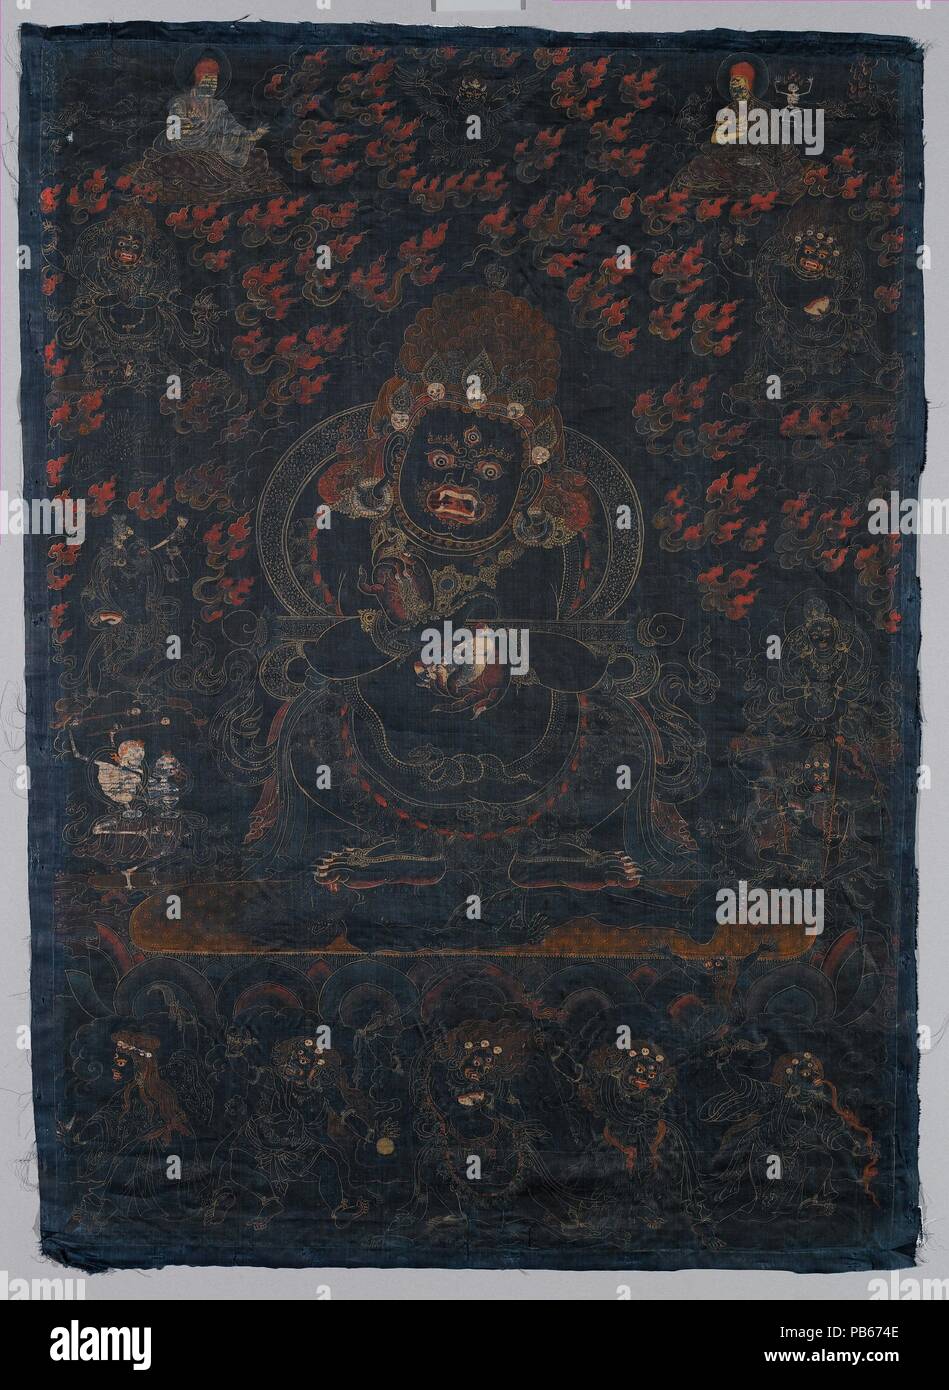 Mahakala, Protector of the Tent. Culture: Tibet. Dimensions: Image: 29 x 20 1/2 in. (73.7 x 52.1 cm)  Overall: 30 1/4 x 21 3/4 in. (76.8 x 55.2 cm). Date: ca. 1650.  This black-ground painting is a visualization image of Mahakala as Panjarantha, the enlightened protector of Buddhism. He tramples a male corpse beneath his feet and displays a flaying knife (kartrika) in his right hand and a skull cup (kapala) in his left, implements for cutting through delusions and ignorance. A ritual wand (gandi) is balanced in the crooks of his arms. Panjaranatha is understood as the 'original' Mahakala from  Stock Photo